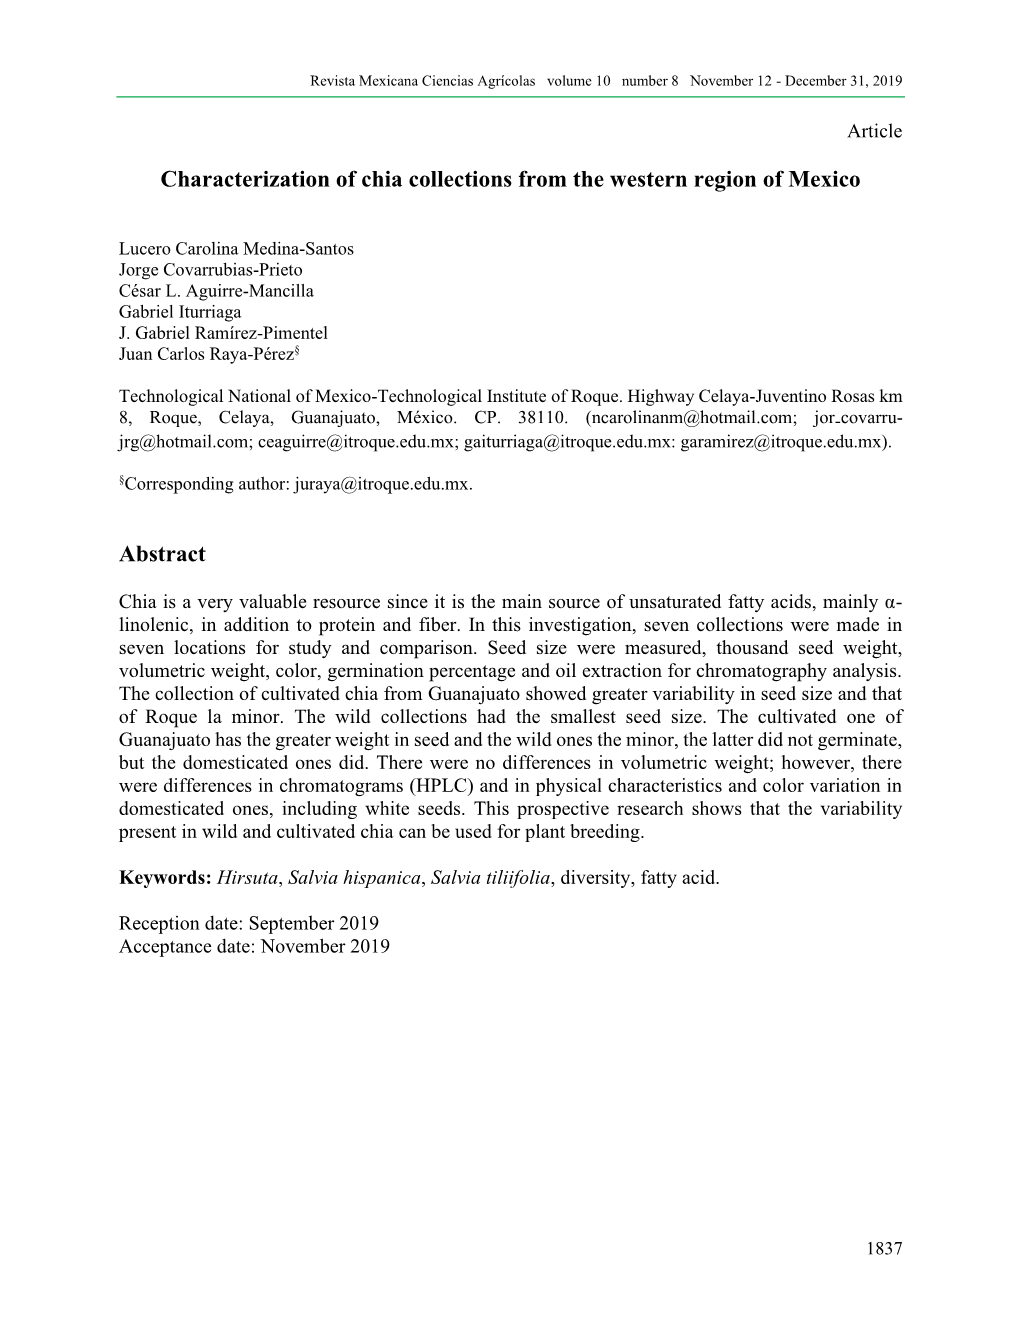 Characterization of Chia Collections from the Western Region of Mexico